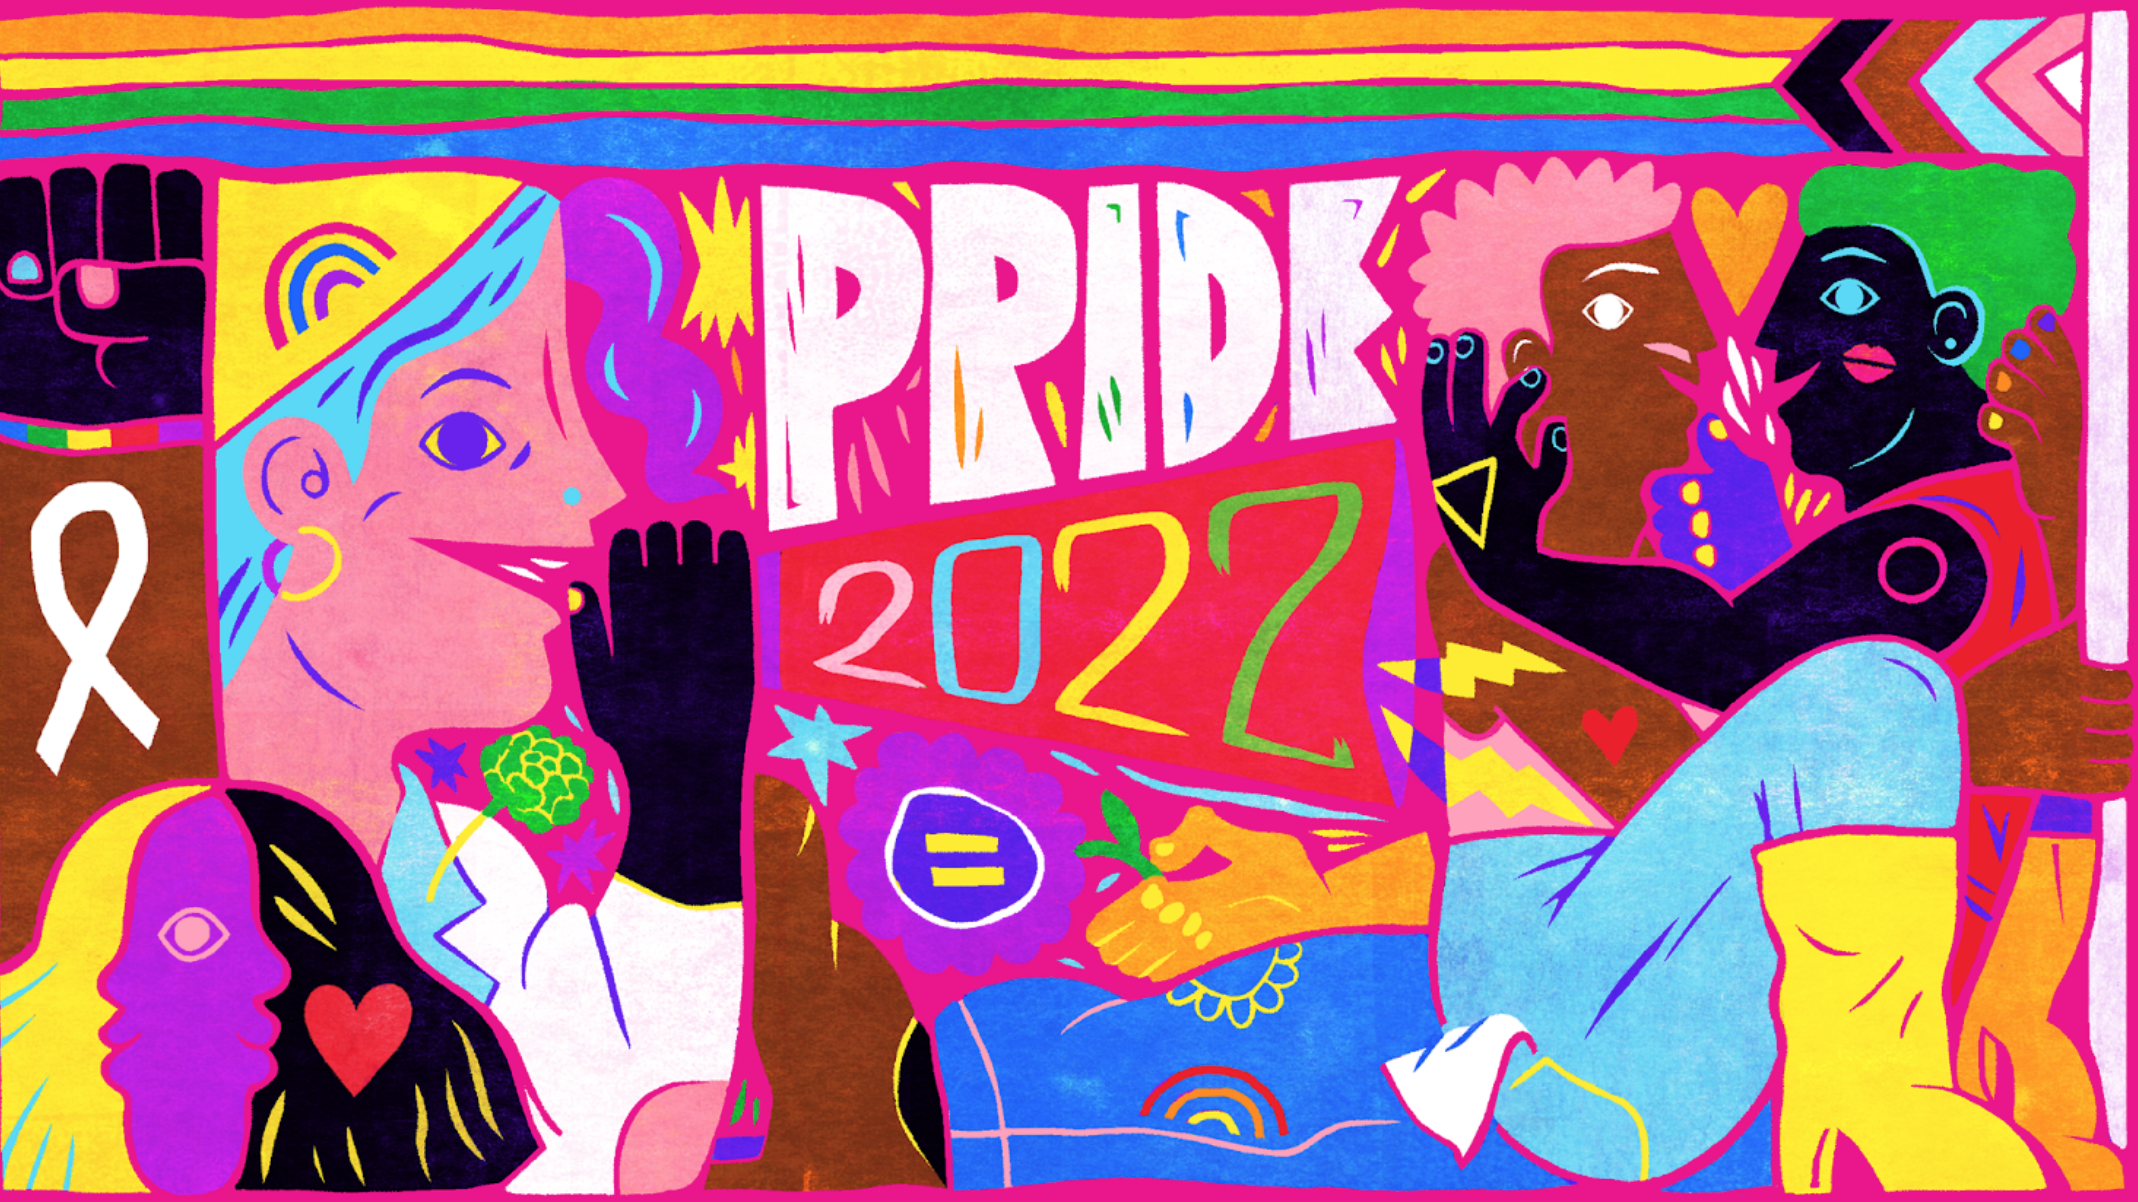 A colorful image showing the many faces of LGBTQ+ pride